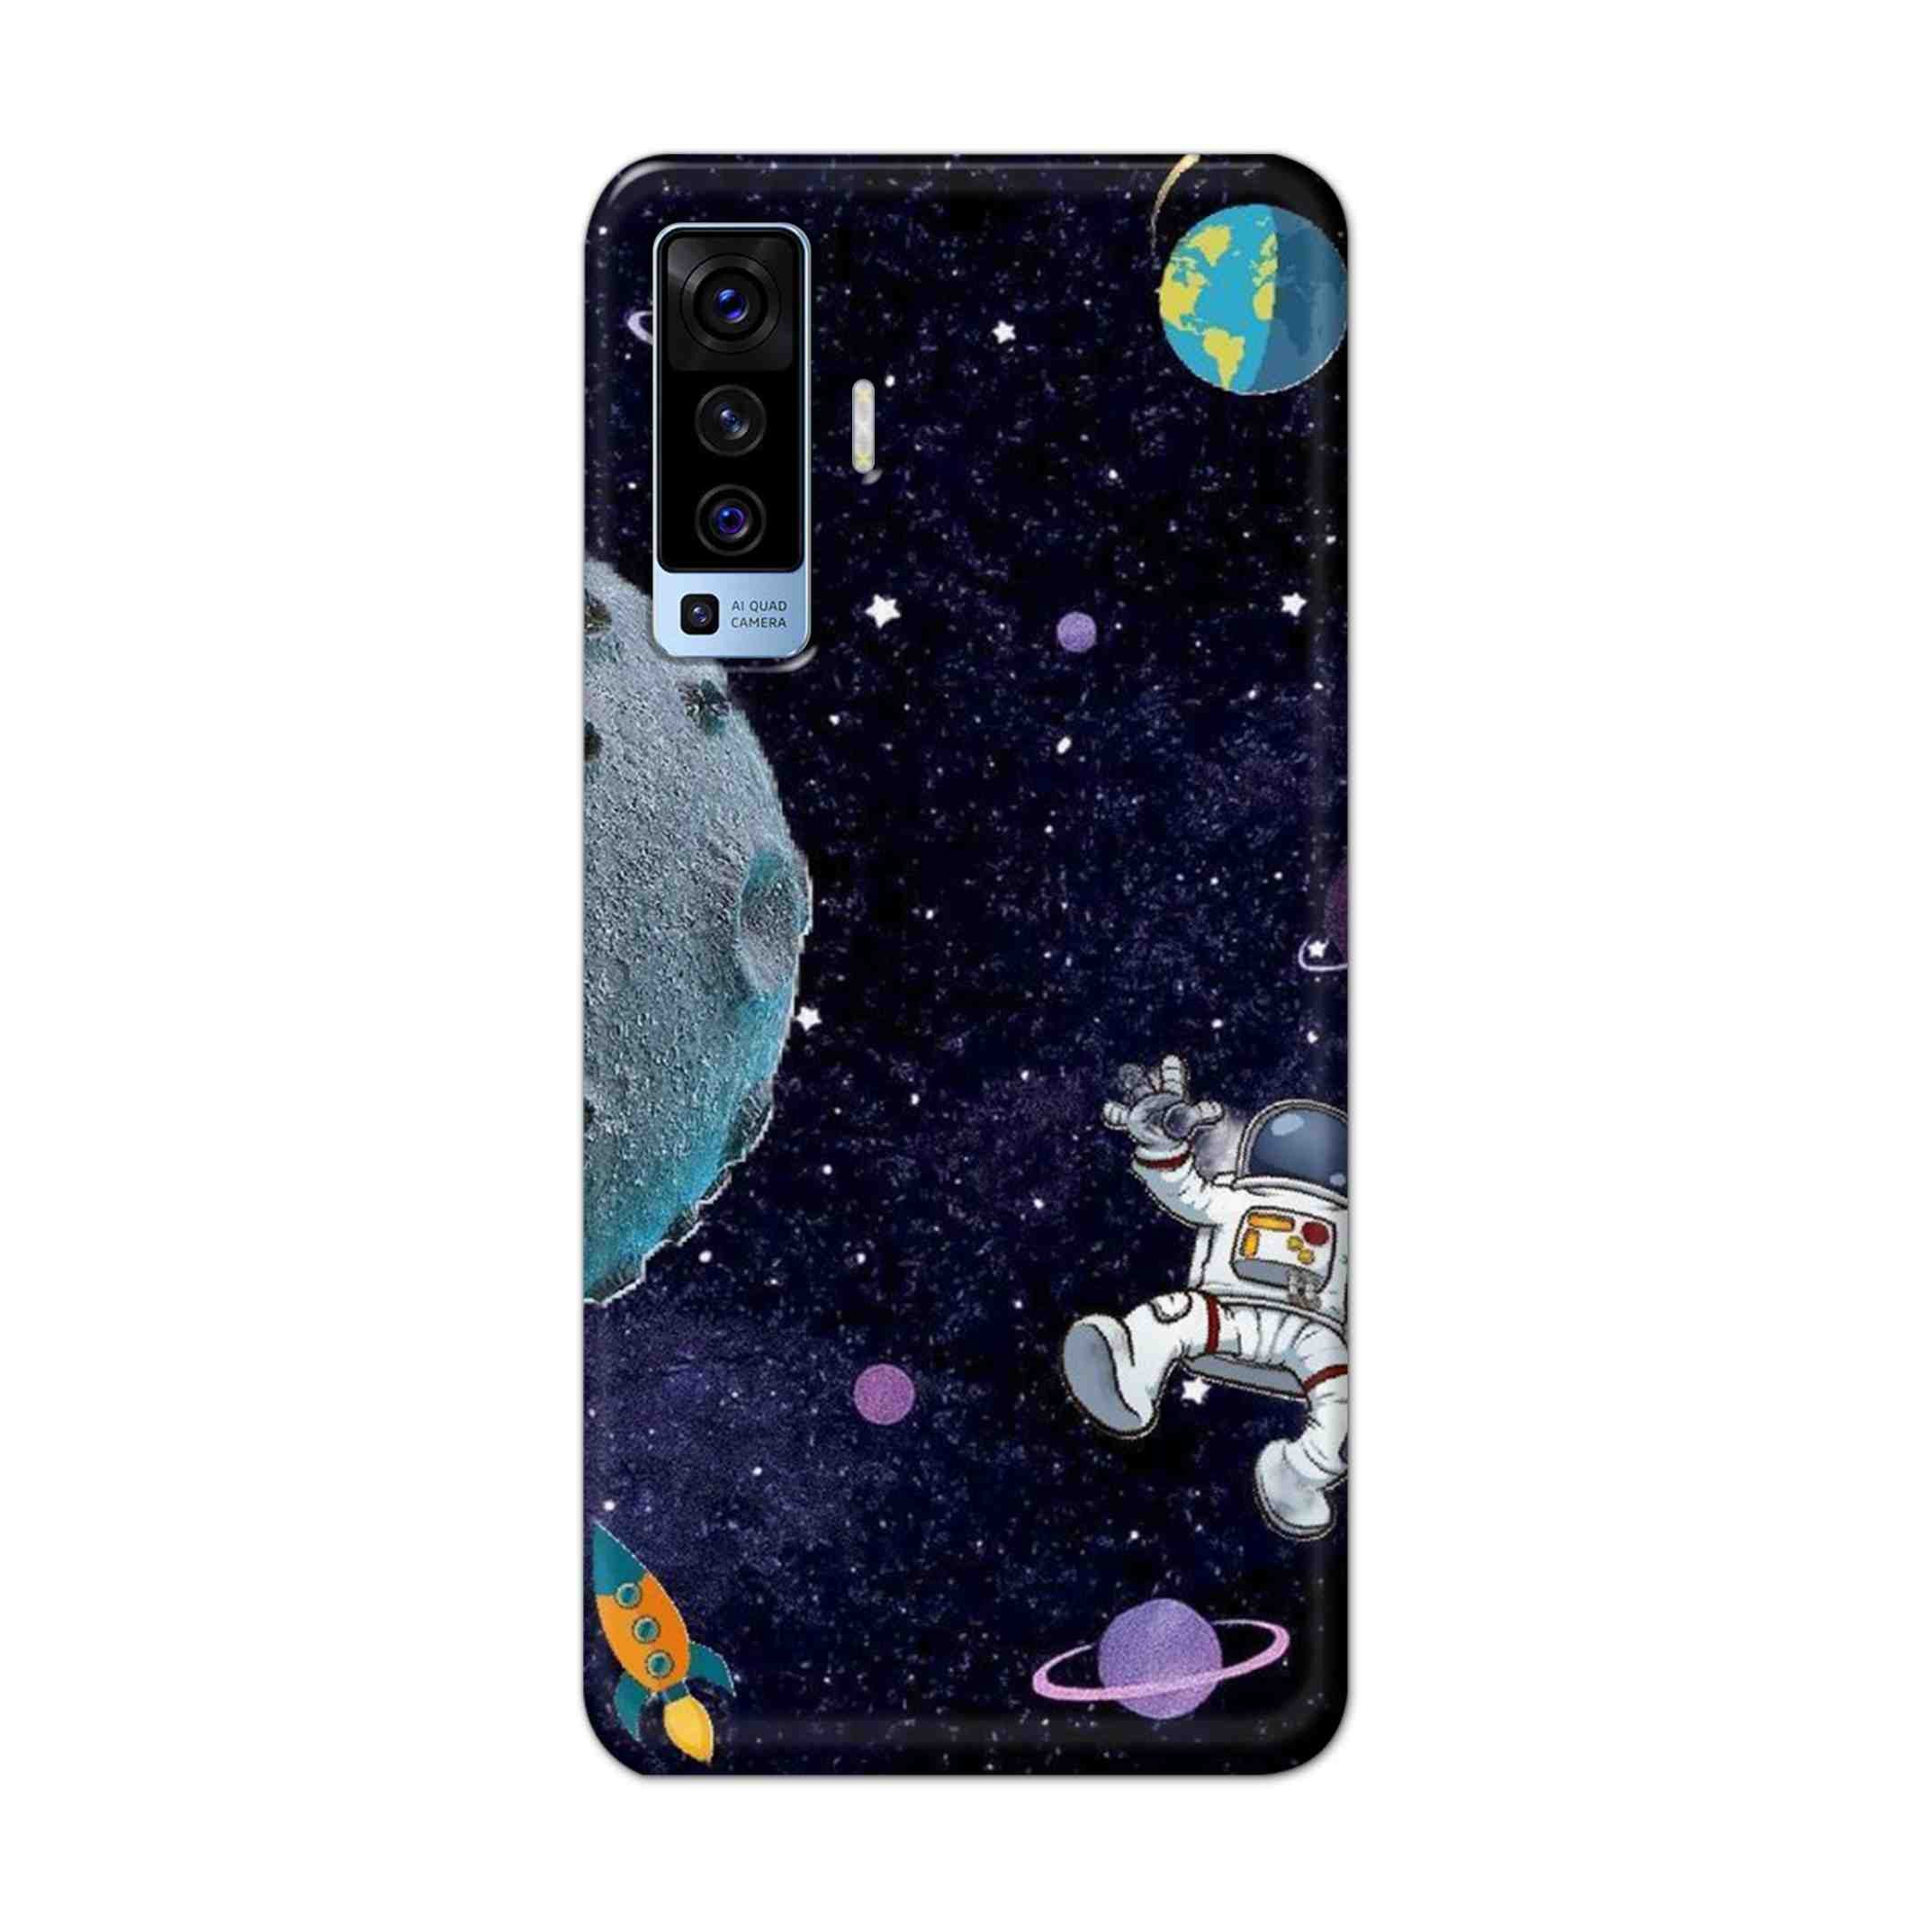 Buy Space Hard Back Mobile Phone Case Cover For Vivo X50 Online